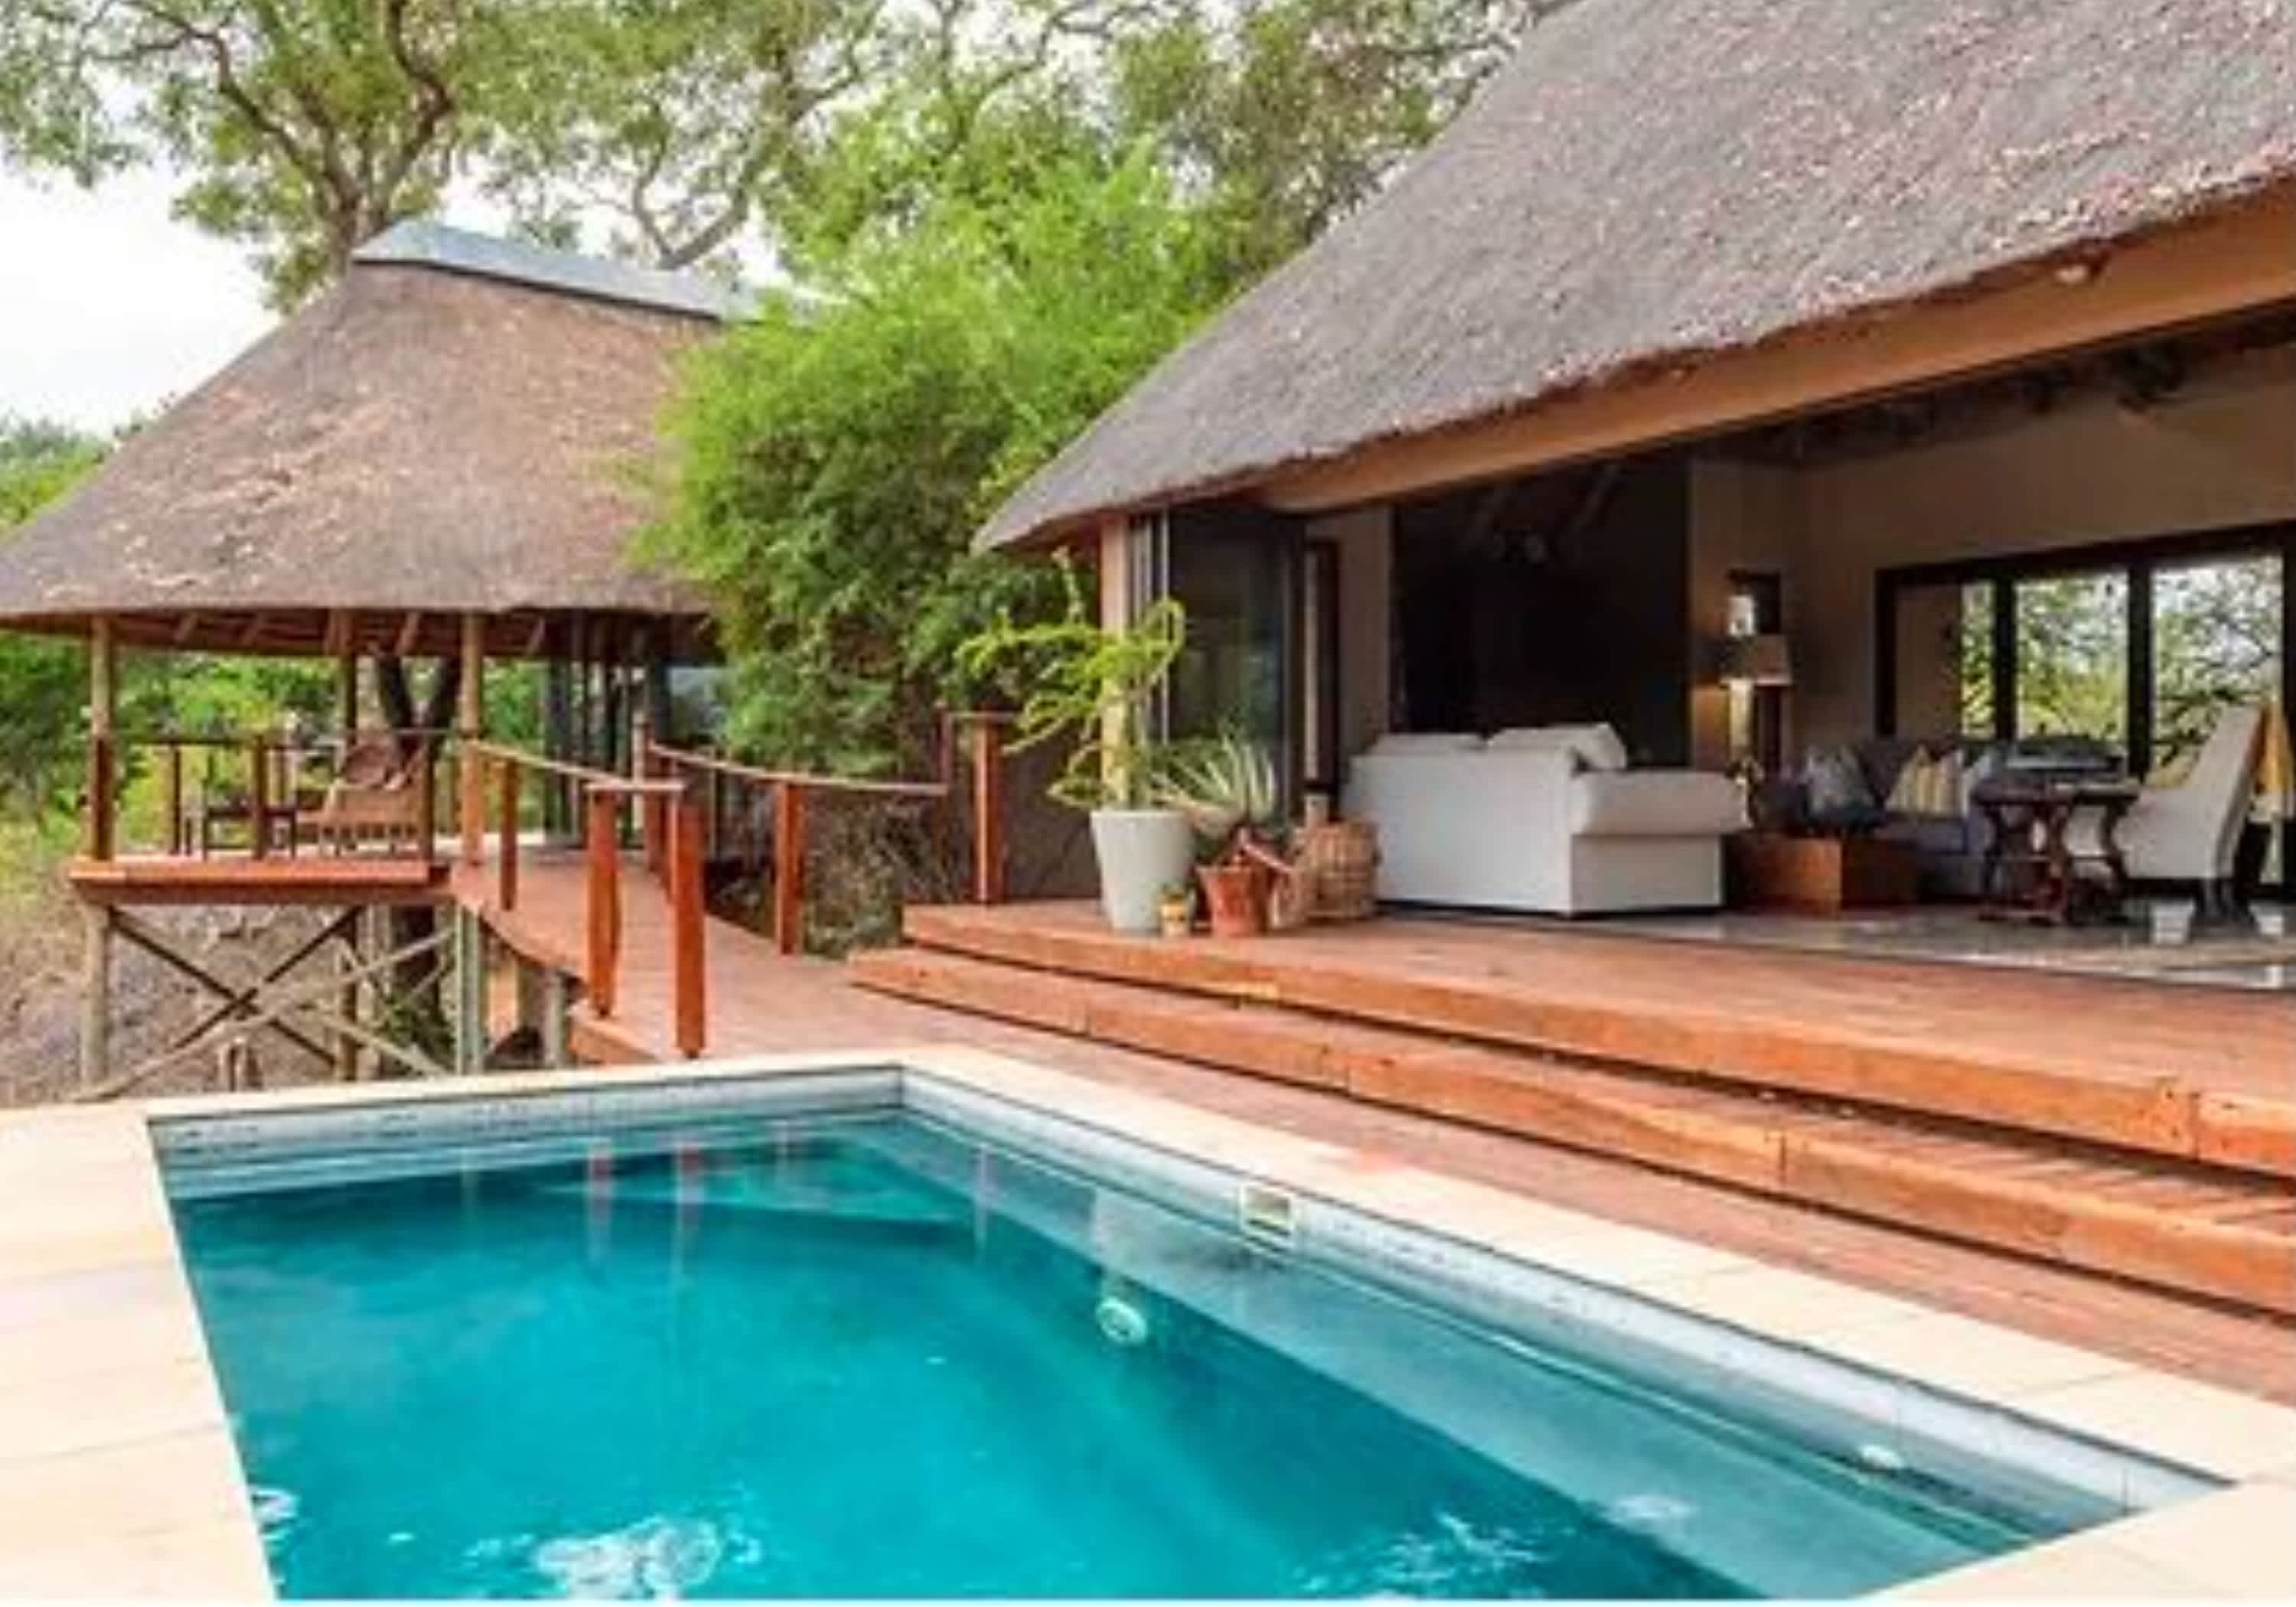 SIVITI TIMBAVATI PLAINS, Greater Kruger National Park - 1 Night Luxury FAMILY Stay for 4 in a Villa - All Meals + Beverages + 2 Game Drives!